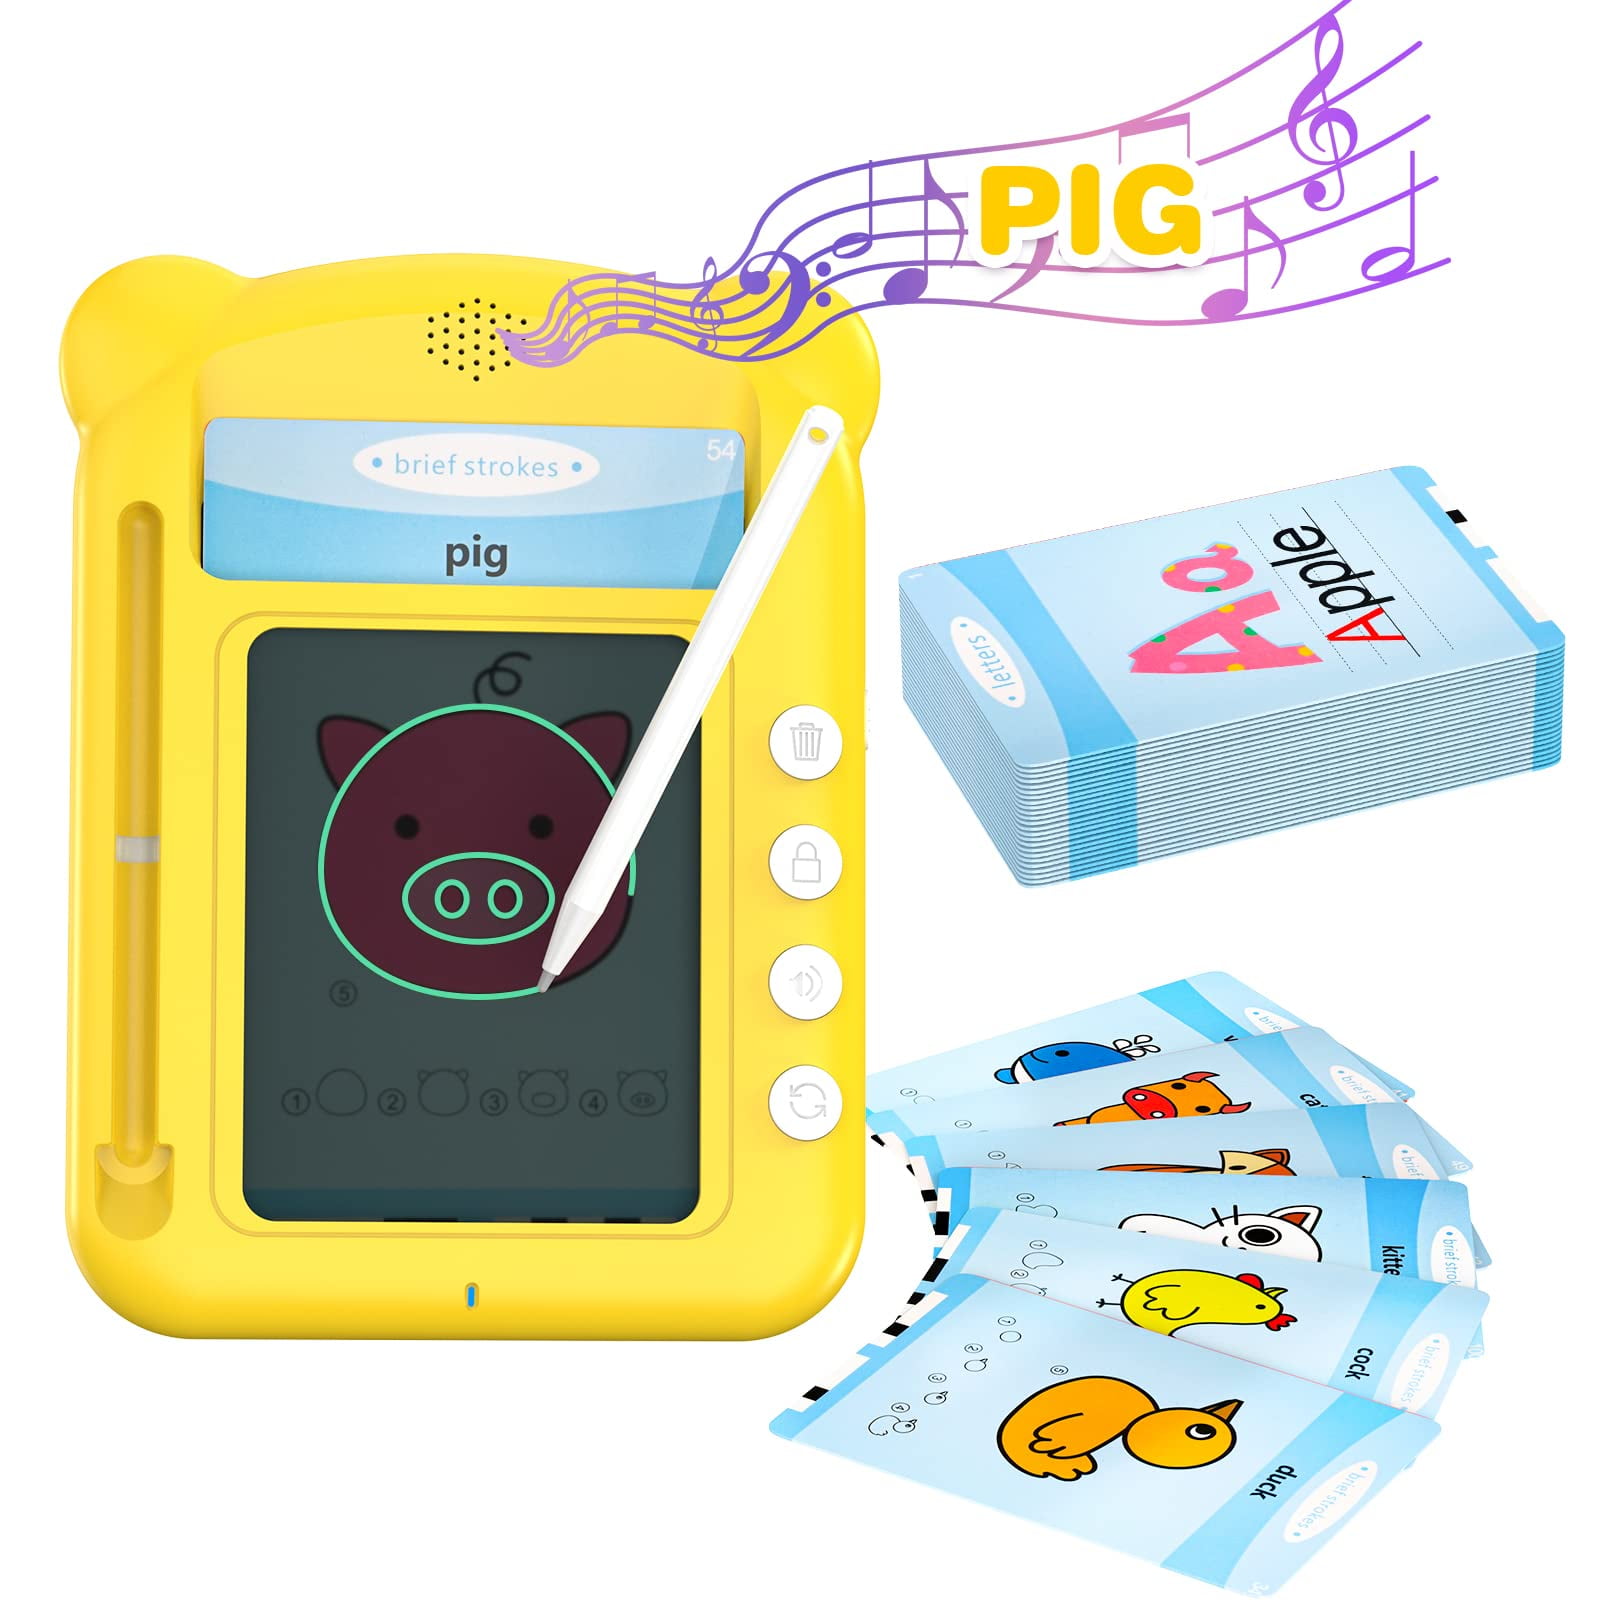 Clear Stock) FOXBOX Kids LCD Drawing Pad Writing tablet Writing